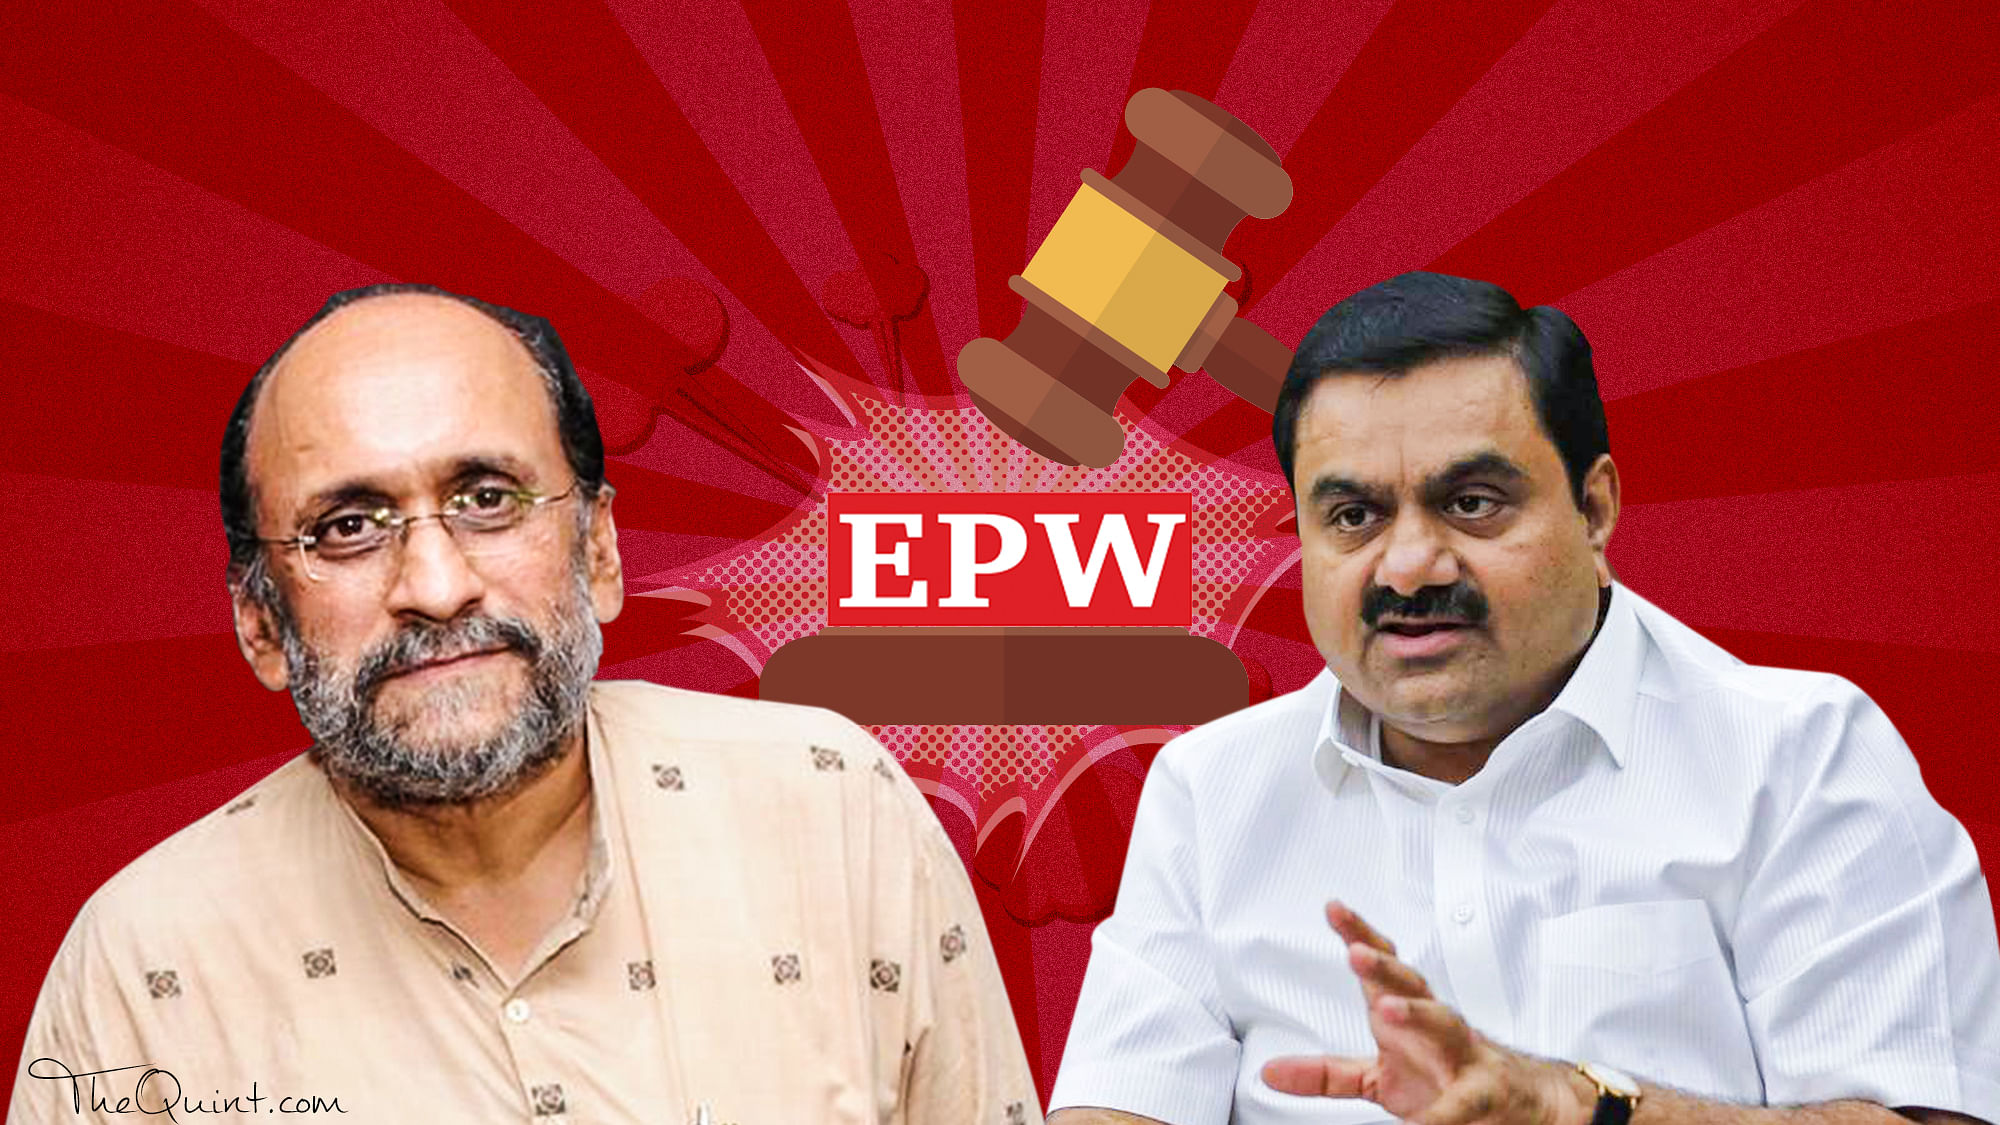 What’s the truth in the battle between former EPW editor Paranjoy Guha Thakurta and one of the Adani companies?